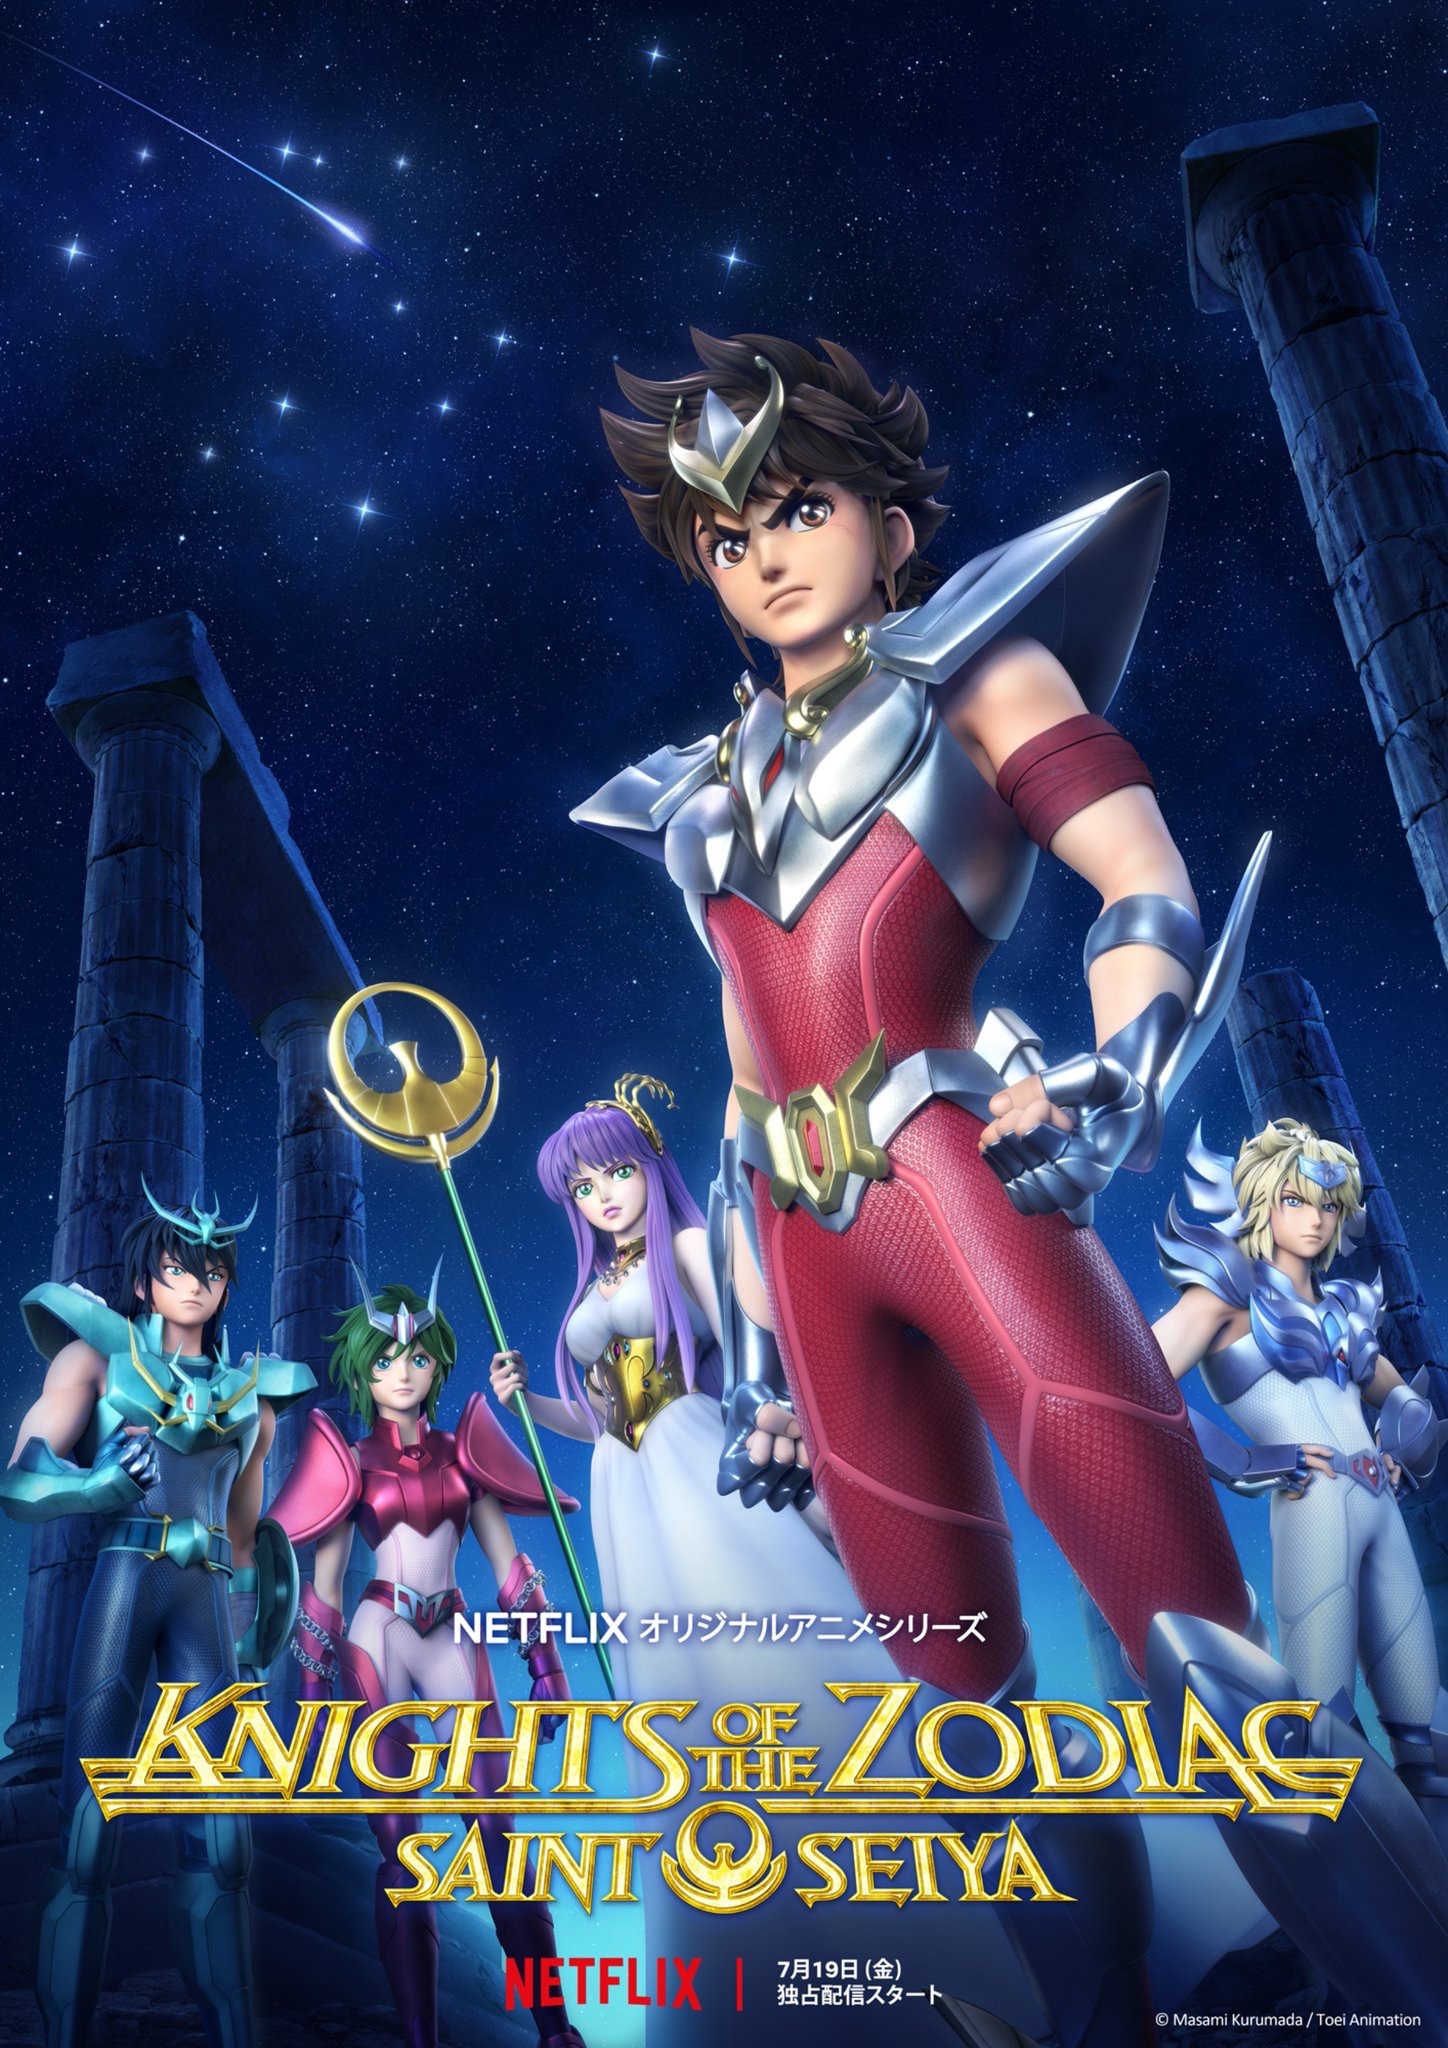 Mega Sized TV Poster Image for Saint Seiya: Knights of the Zodiac (#2 of 2)